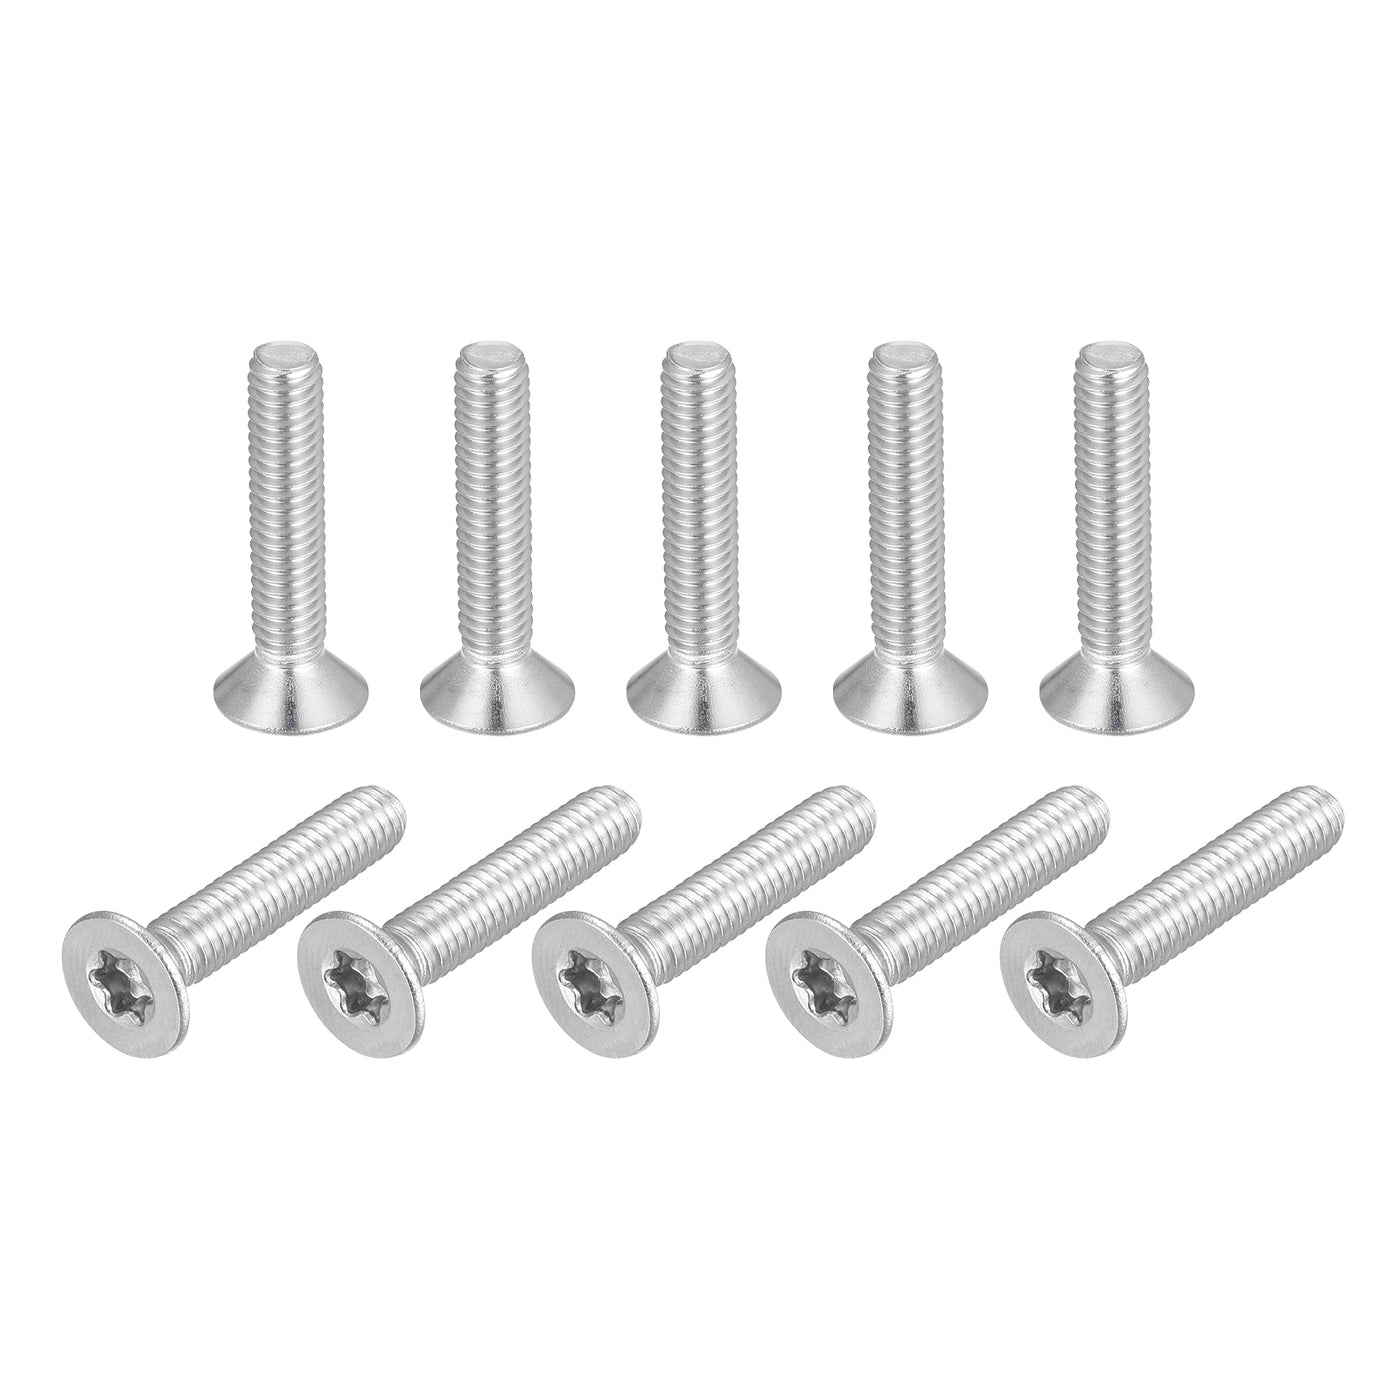 uxcell Uxcell M4x20mm Torx Security Screws, 10pcs 316 Stainless Steel Countersunk Head Screw